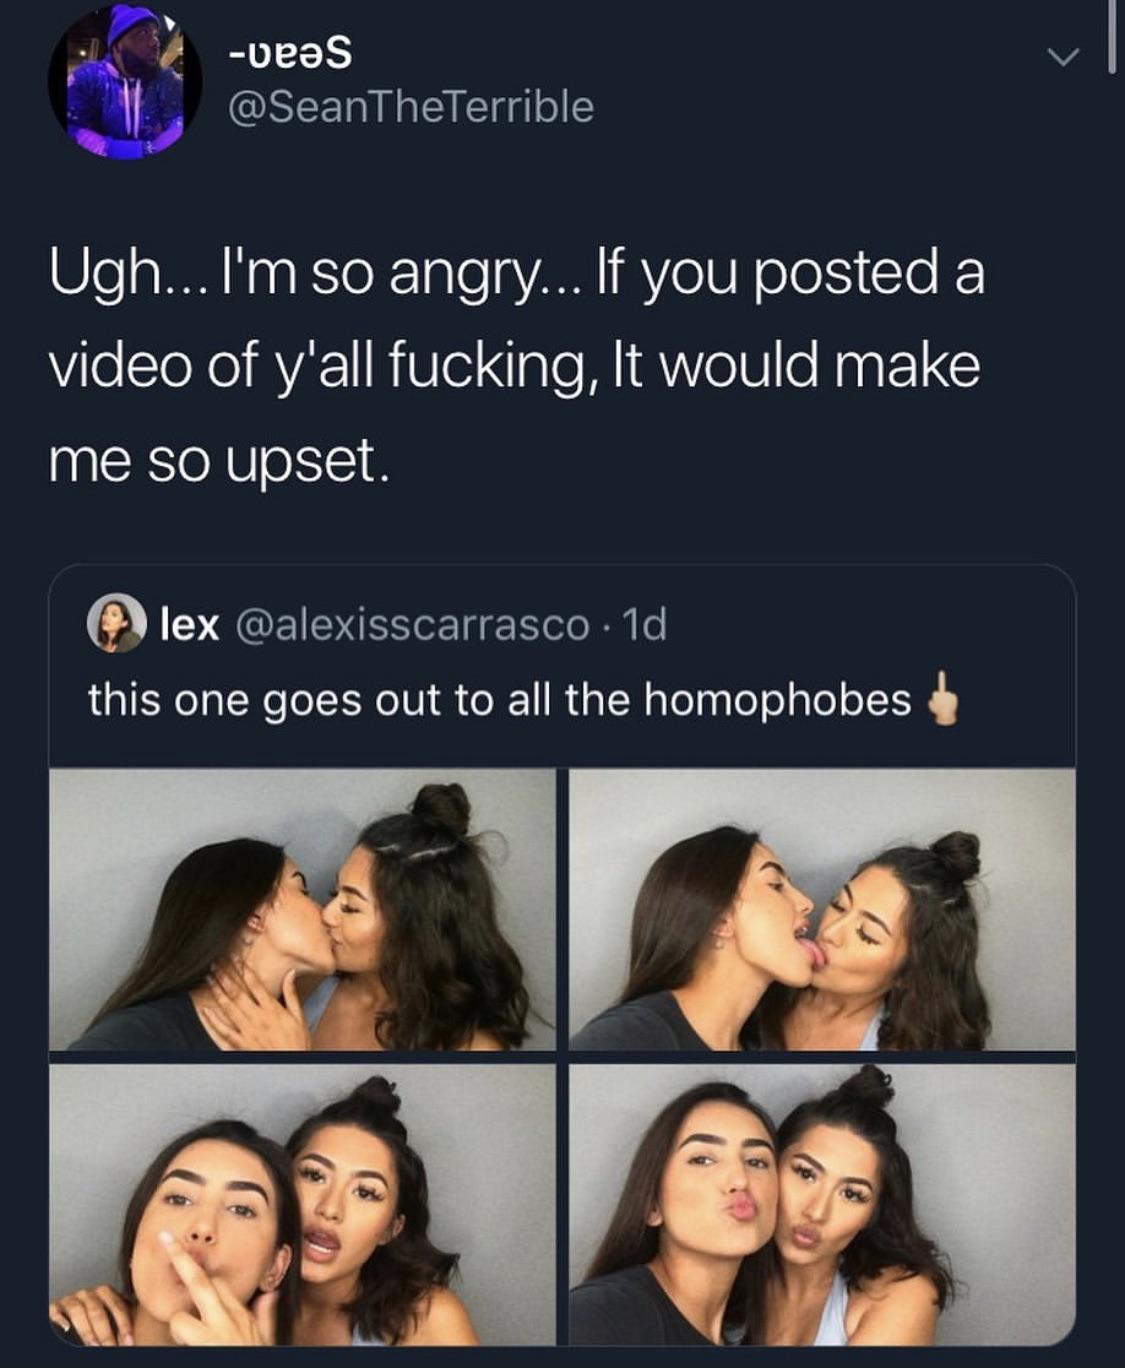 what's pride month - veS veas Ugh... I'm so angry... If you posted a video of y'all fucking, It would make me so upset. lex . 1d this one goes out to all the homophobes